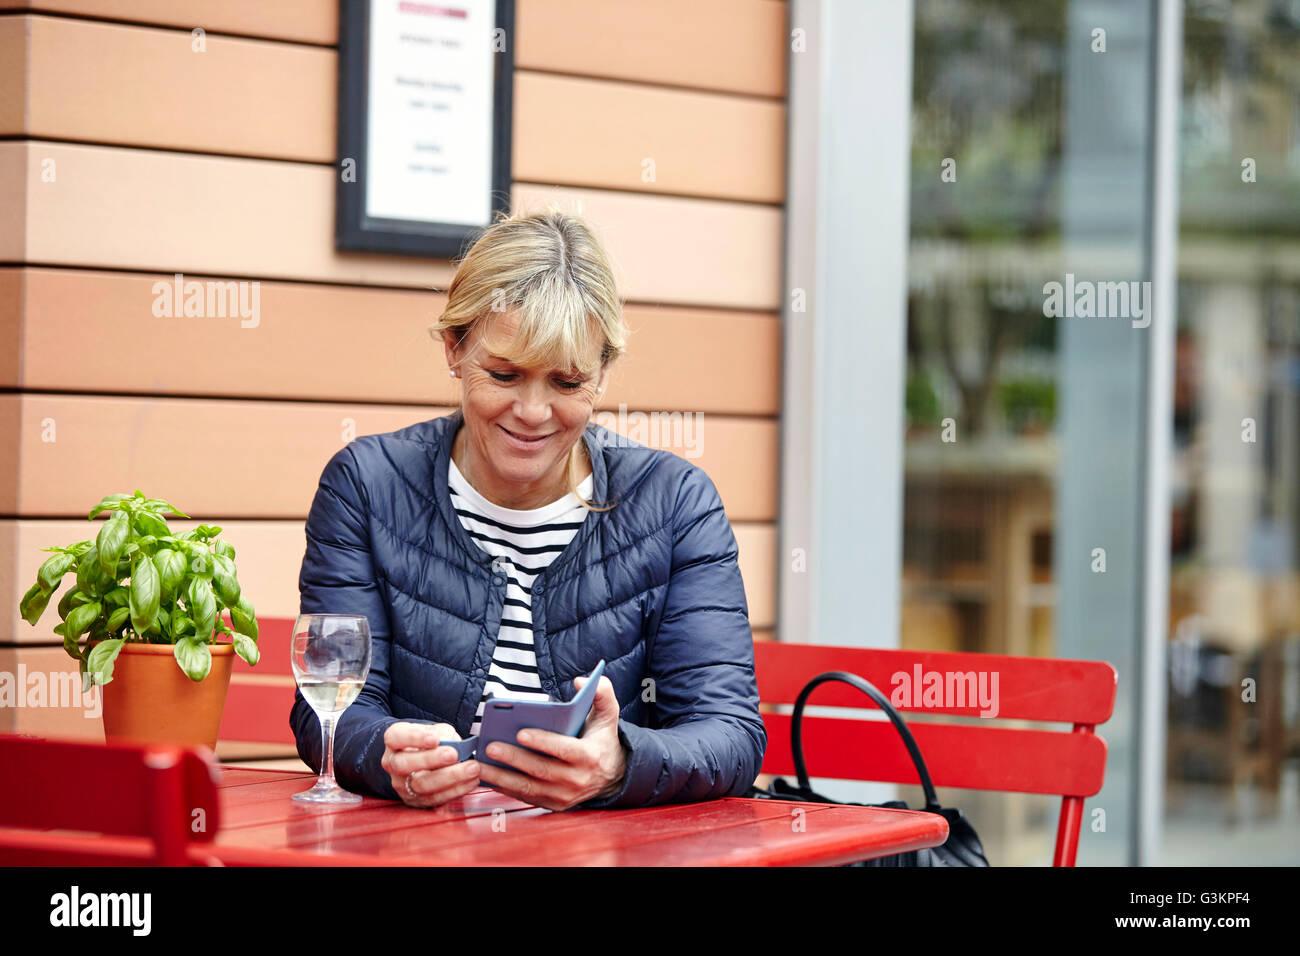 Mature woman reading smartphone texts at sidewalk cafe Stock Photo